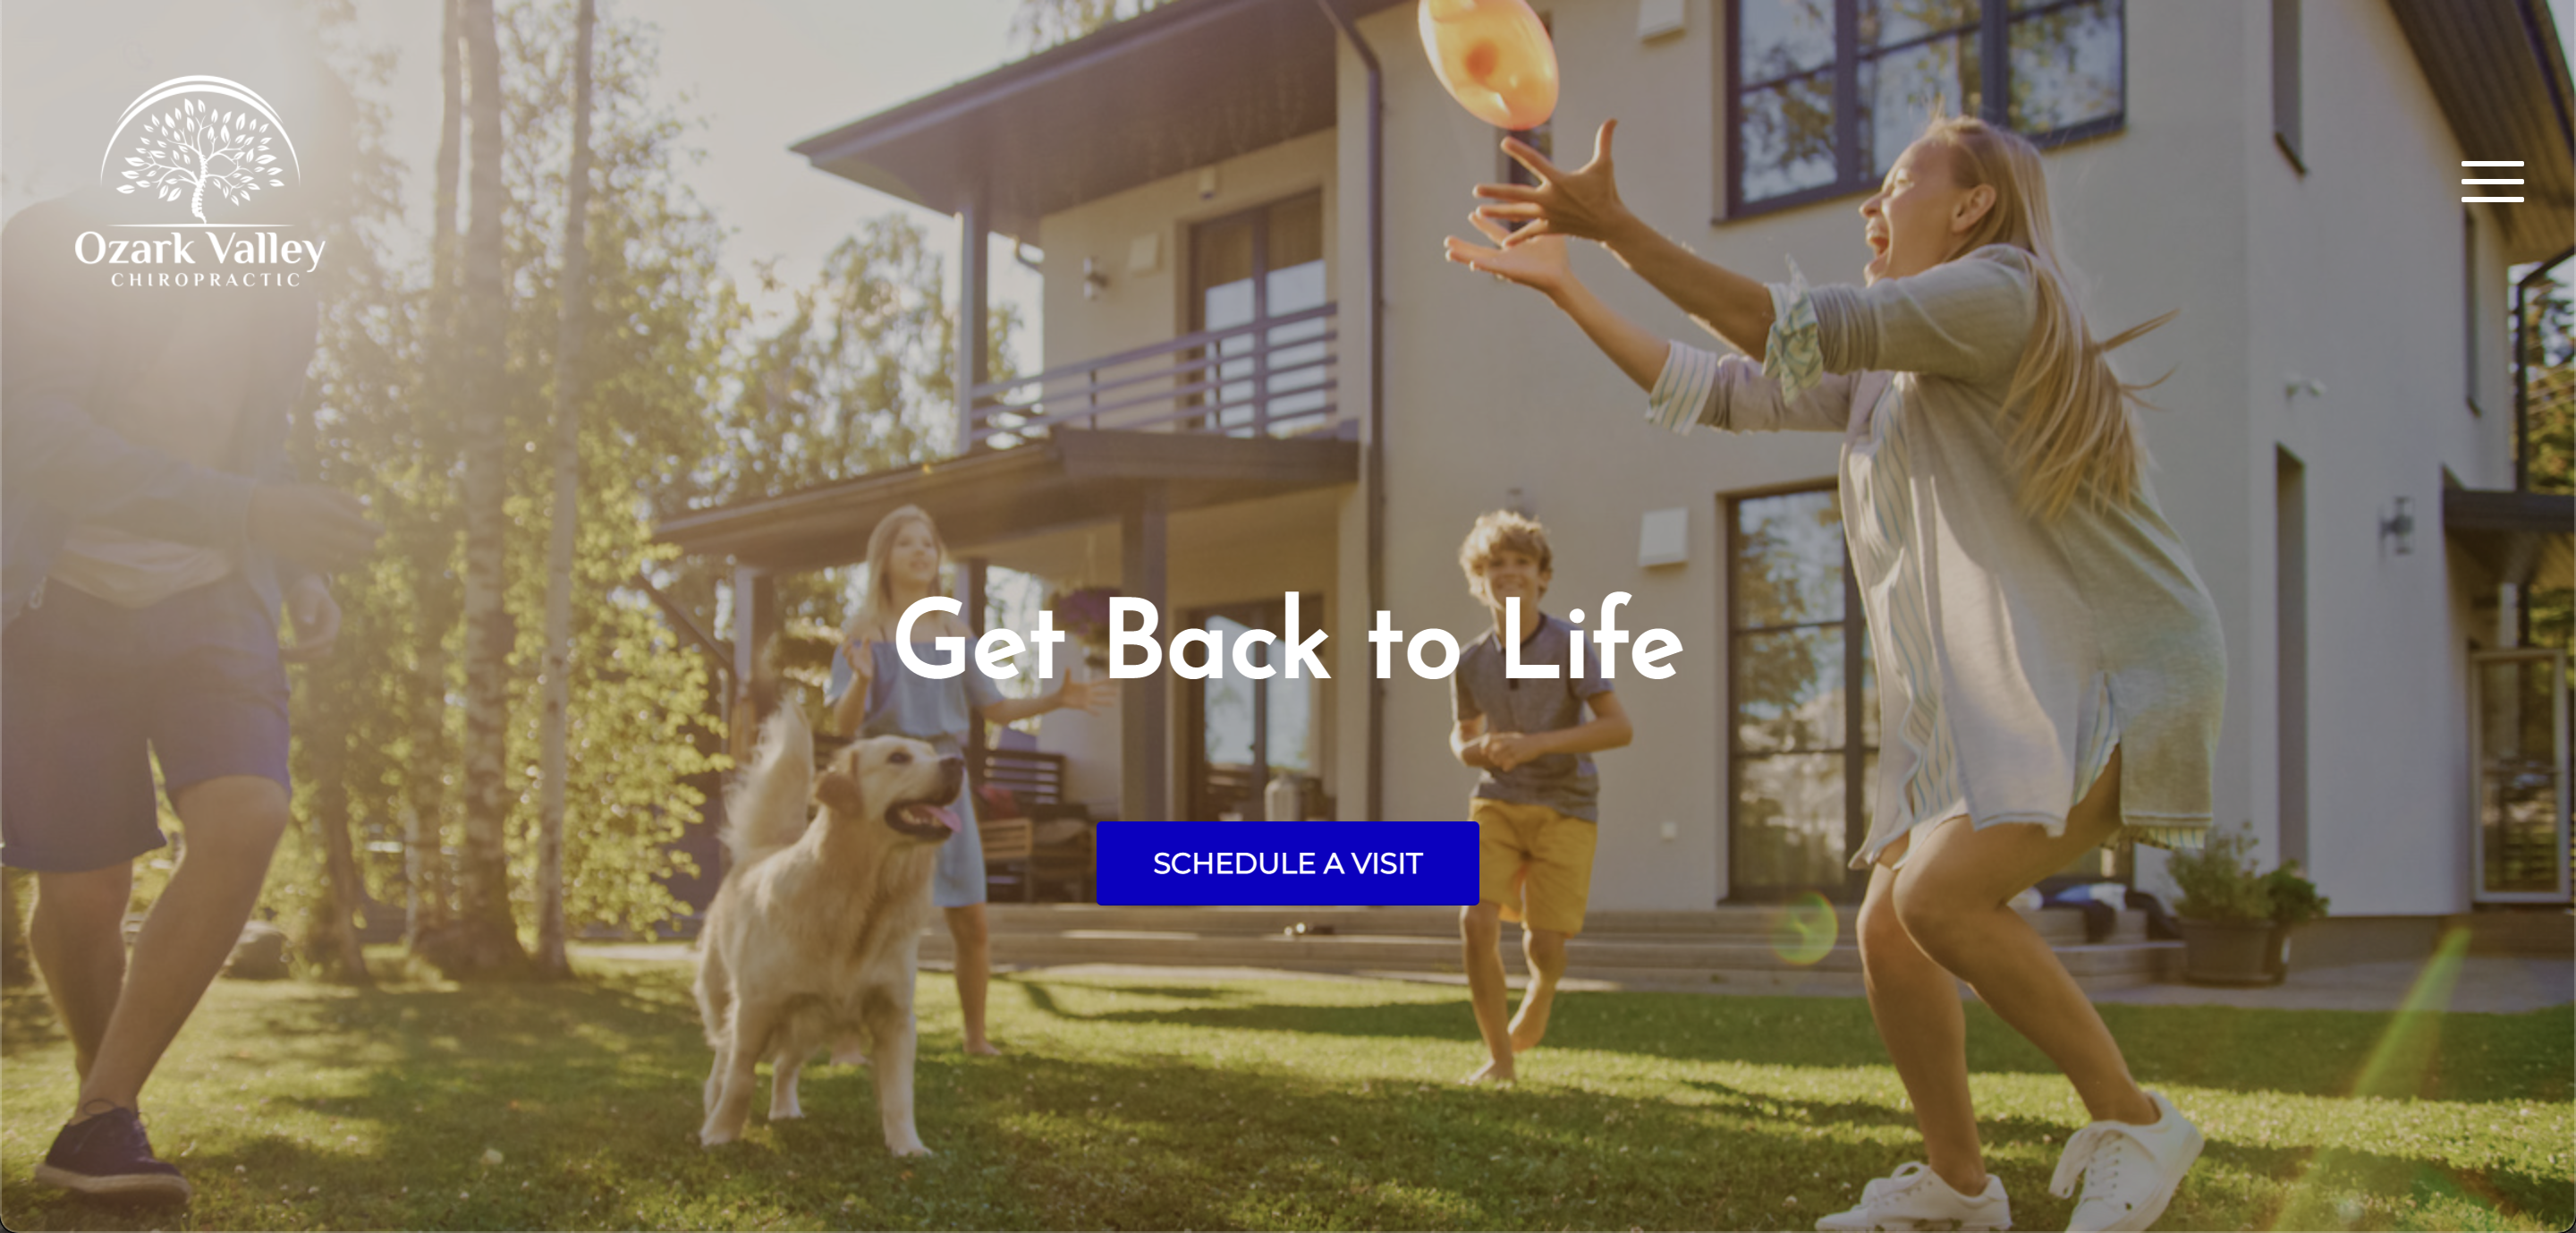 image of family playing in backyard with Ozark Valley Chiropractic logo and headline "Get Back to Life"